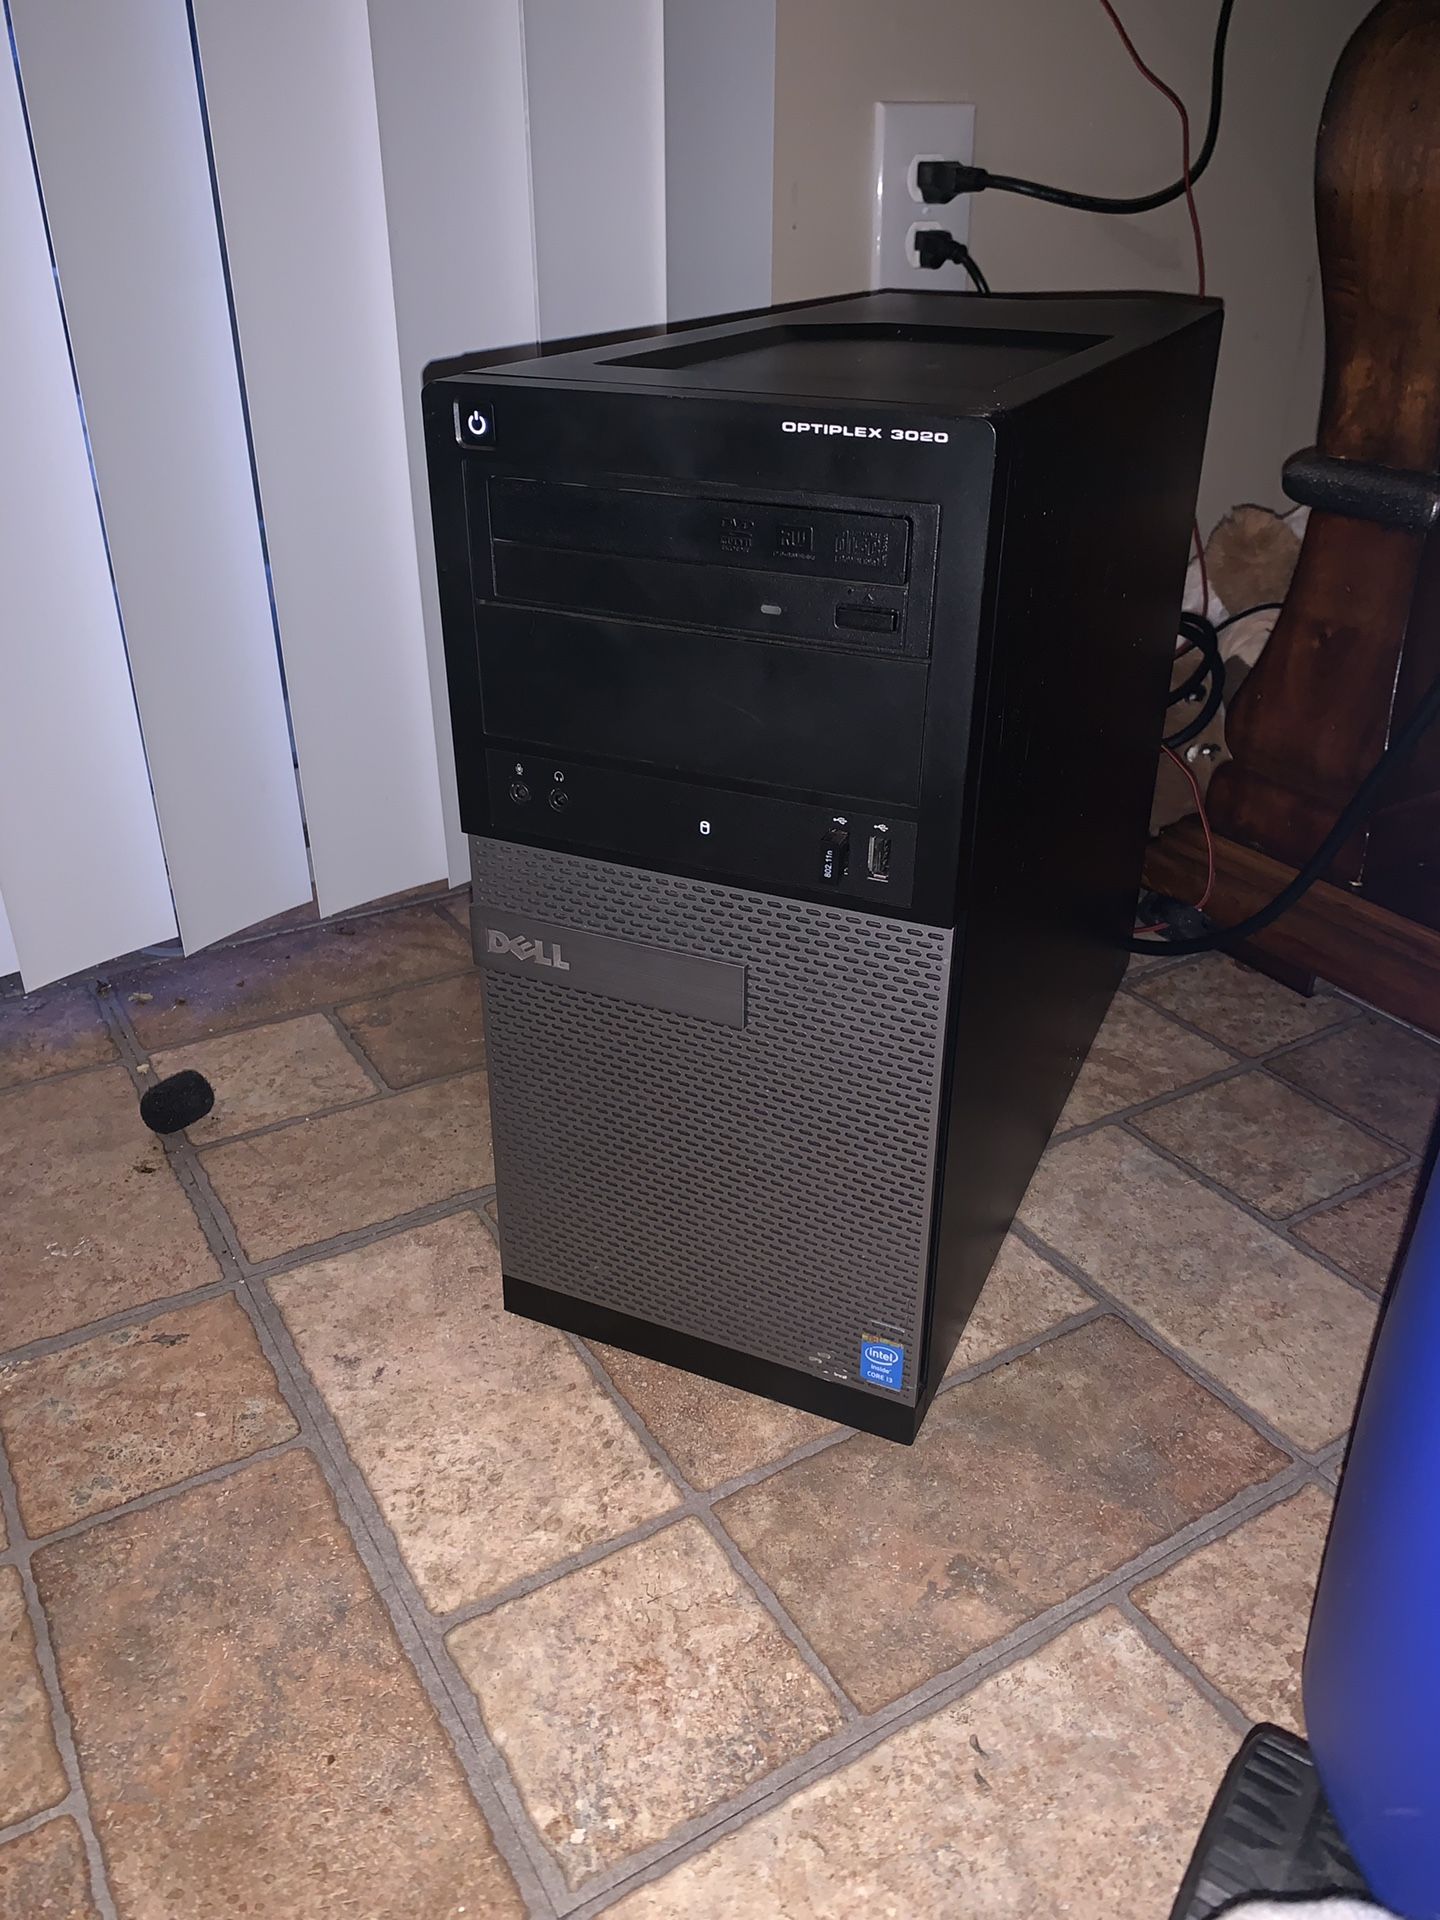 Dell Optiplex 2020 - Used for gaming